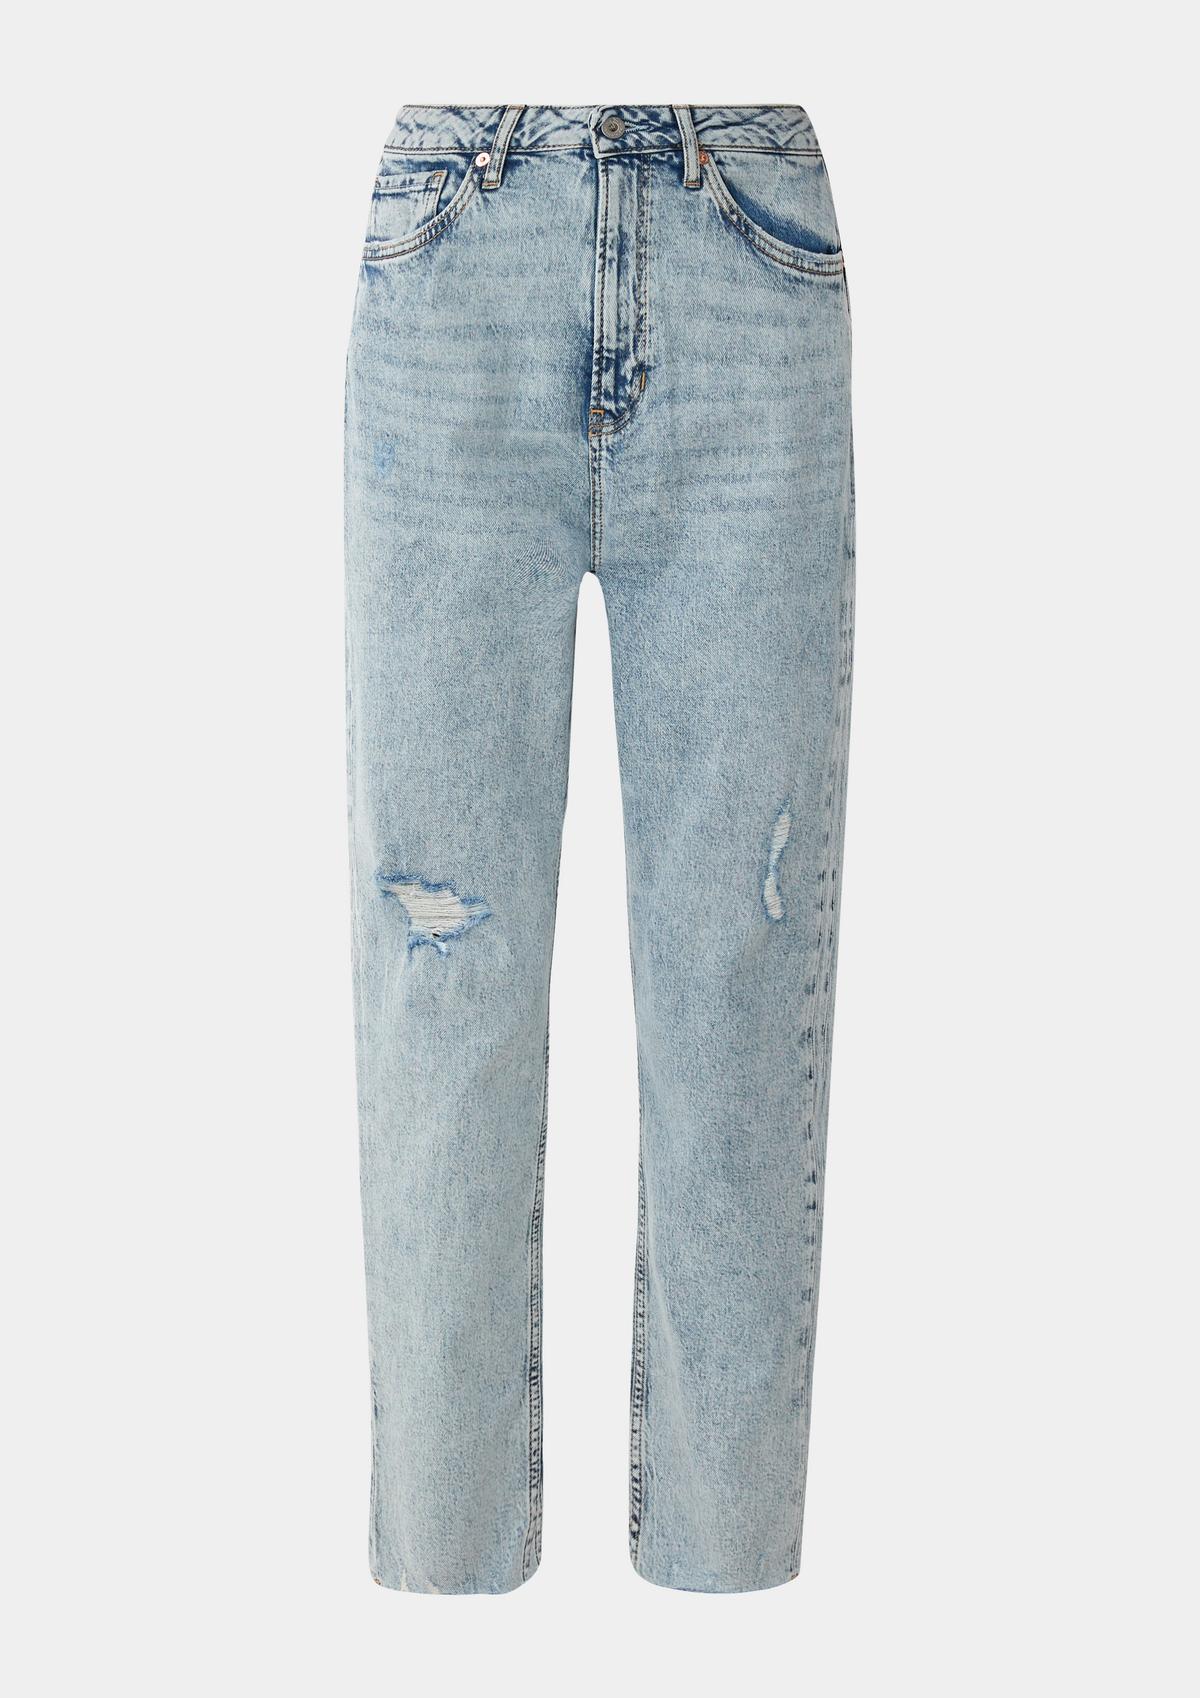 DTT Veron relaxed fit mom jeans in light blue wash